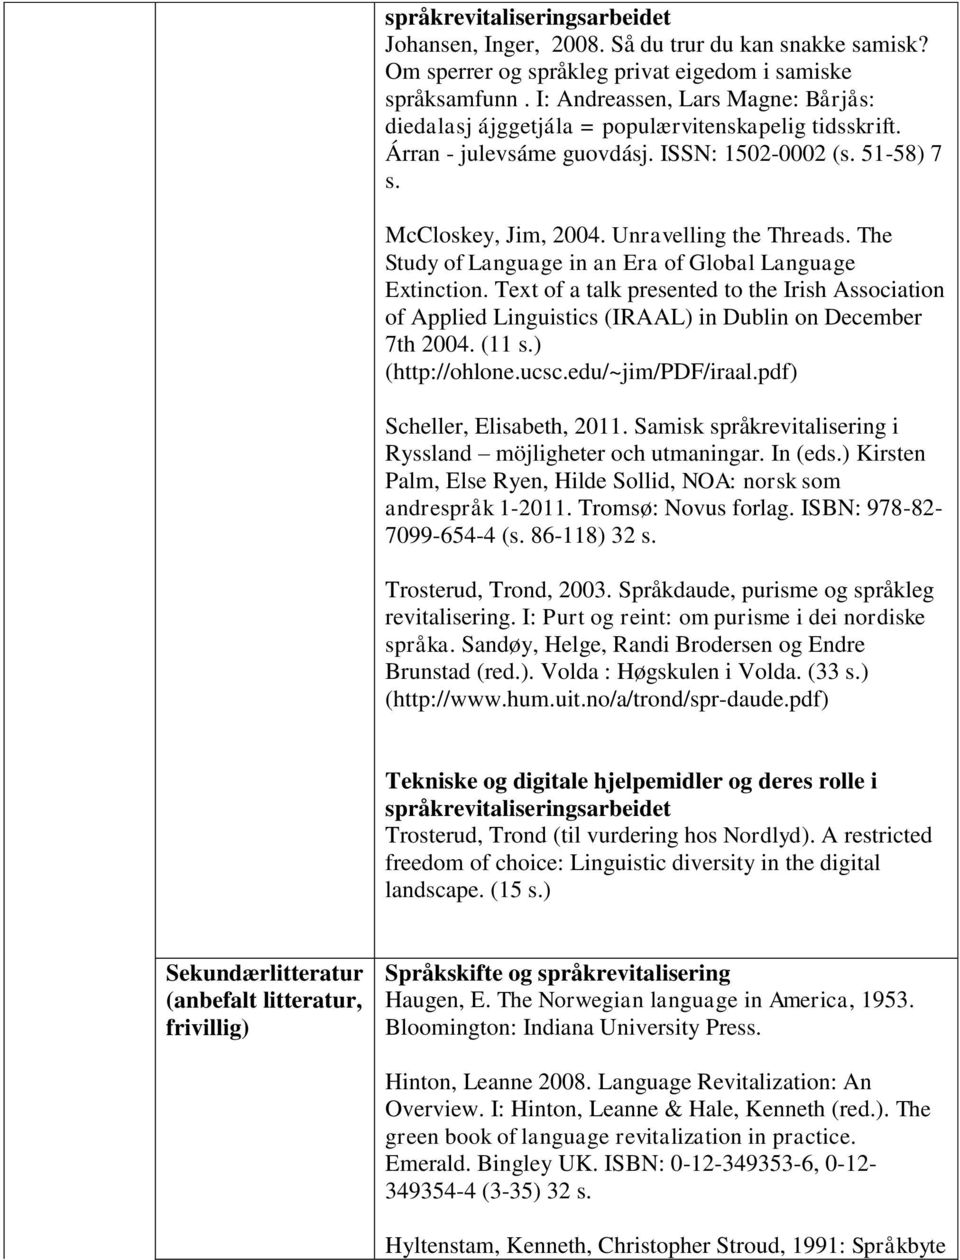 The Study of Language in an Era of Global Language Extinction. Text of a talk presented to the Irish Association of Applied Linguistics (IRAAL) in Dublin on December 7th 2004. (11 s.) (http://ohlone.